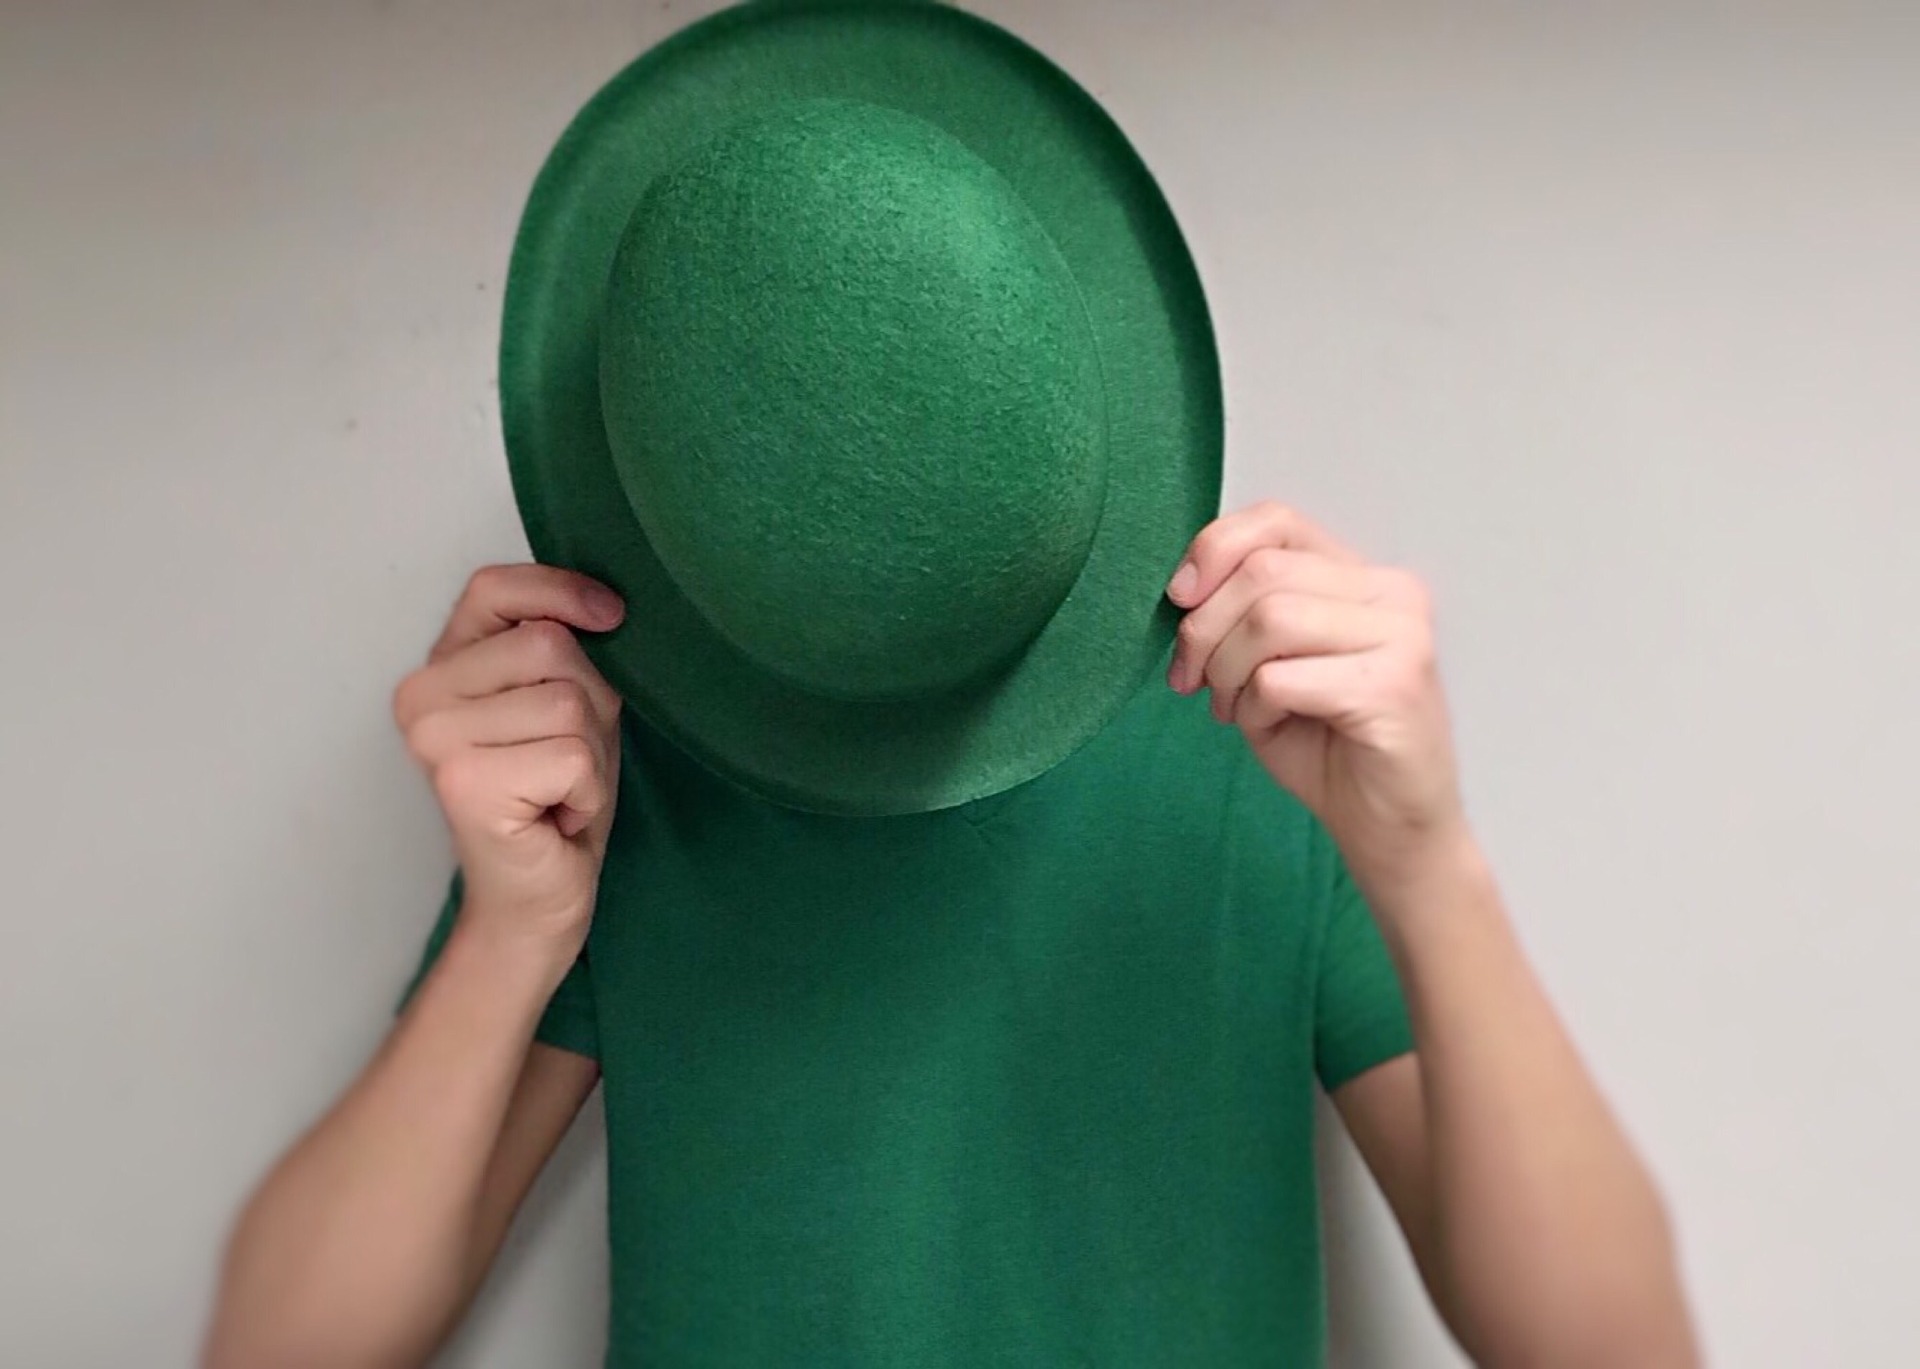 How to green screen your friends’ St. Patrick’s Day garb